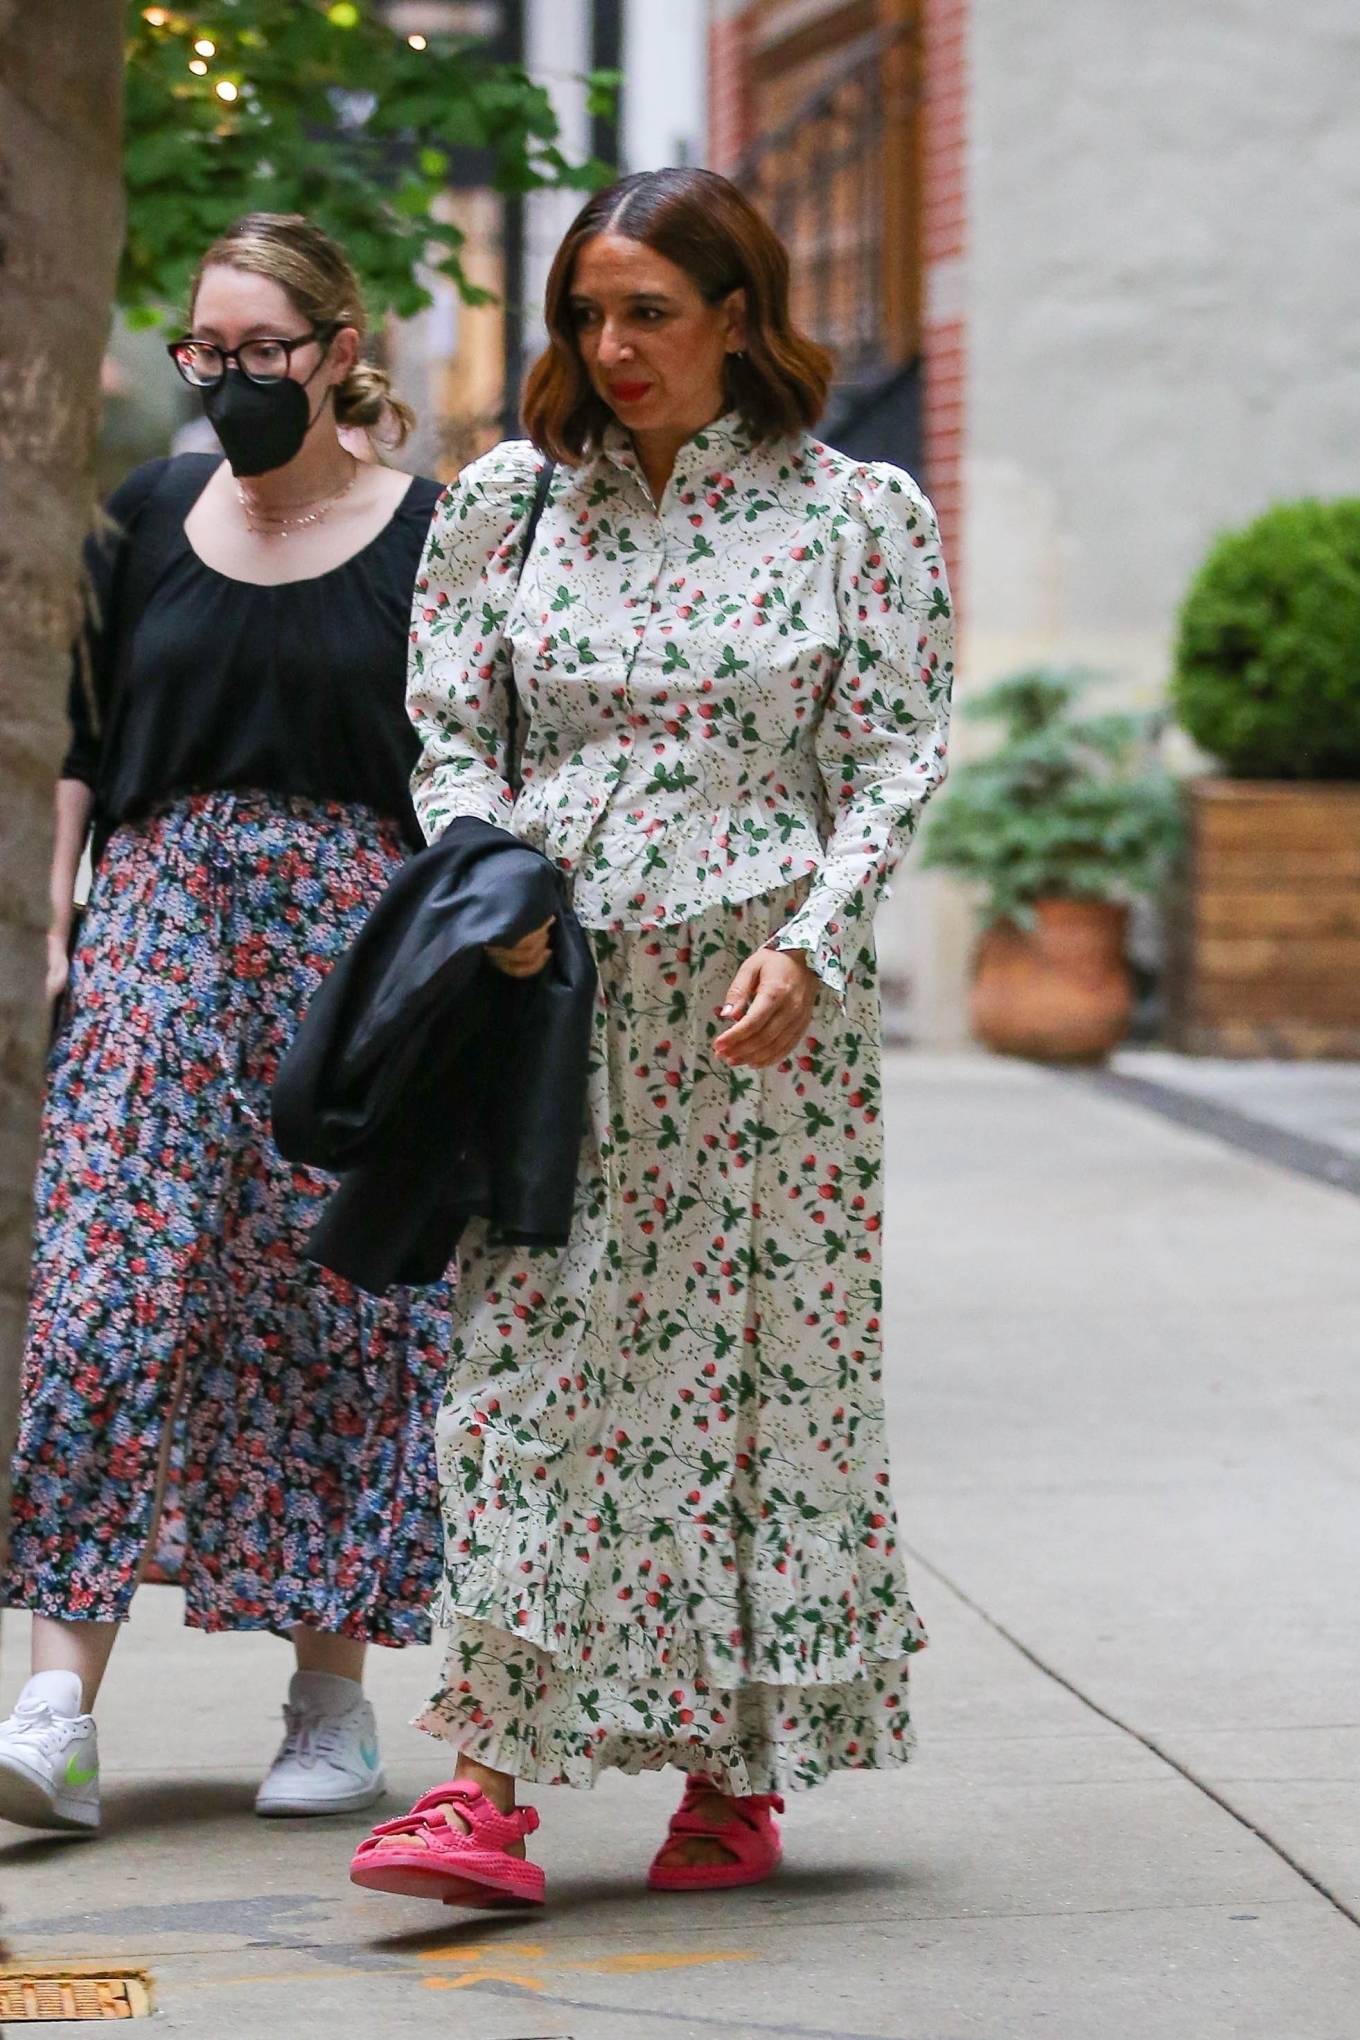 Maya Rudolph 2022 : Maya Rudolph – In a floral dress steps out in New York-13